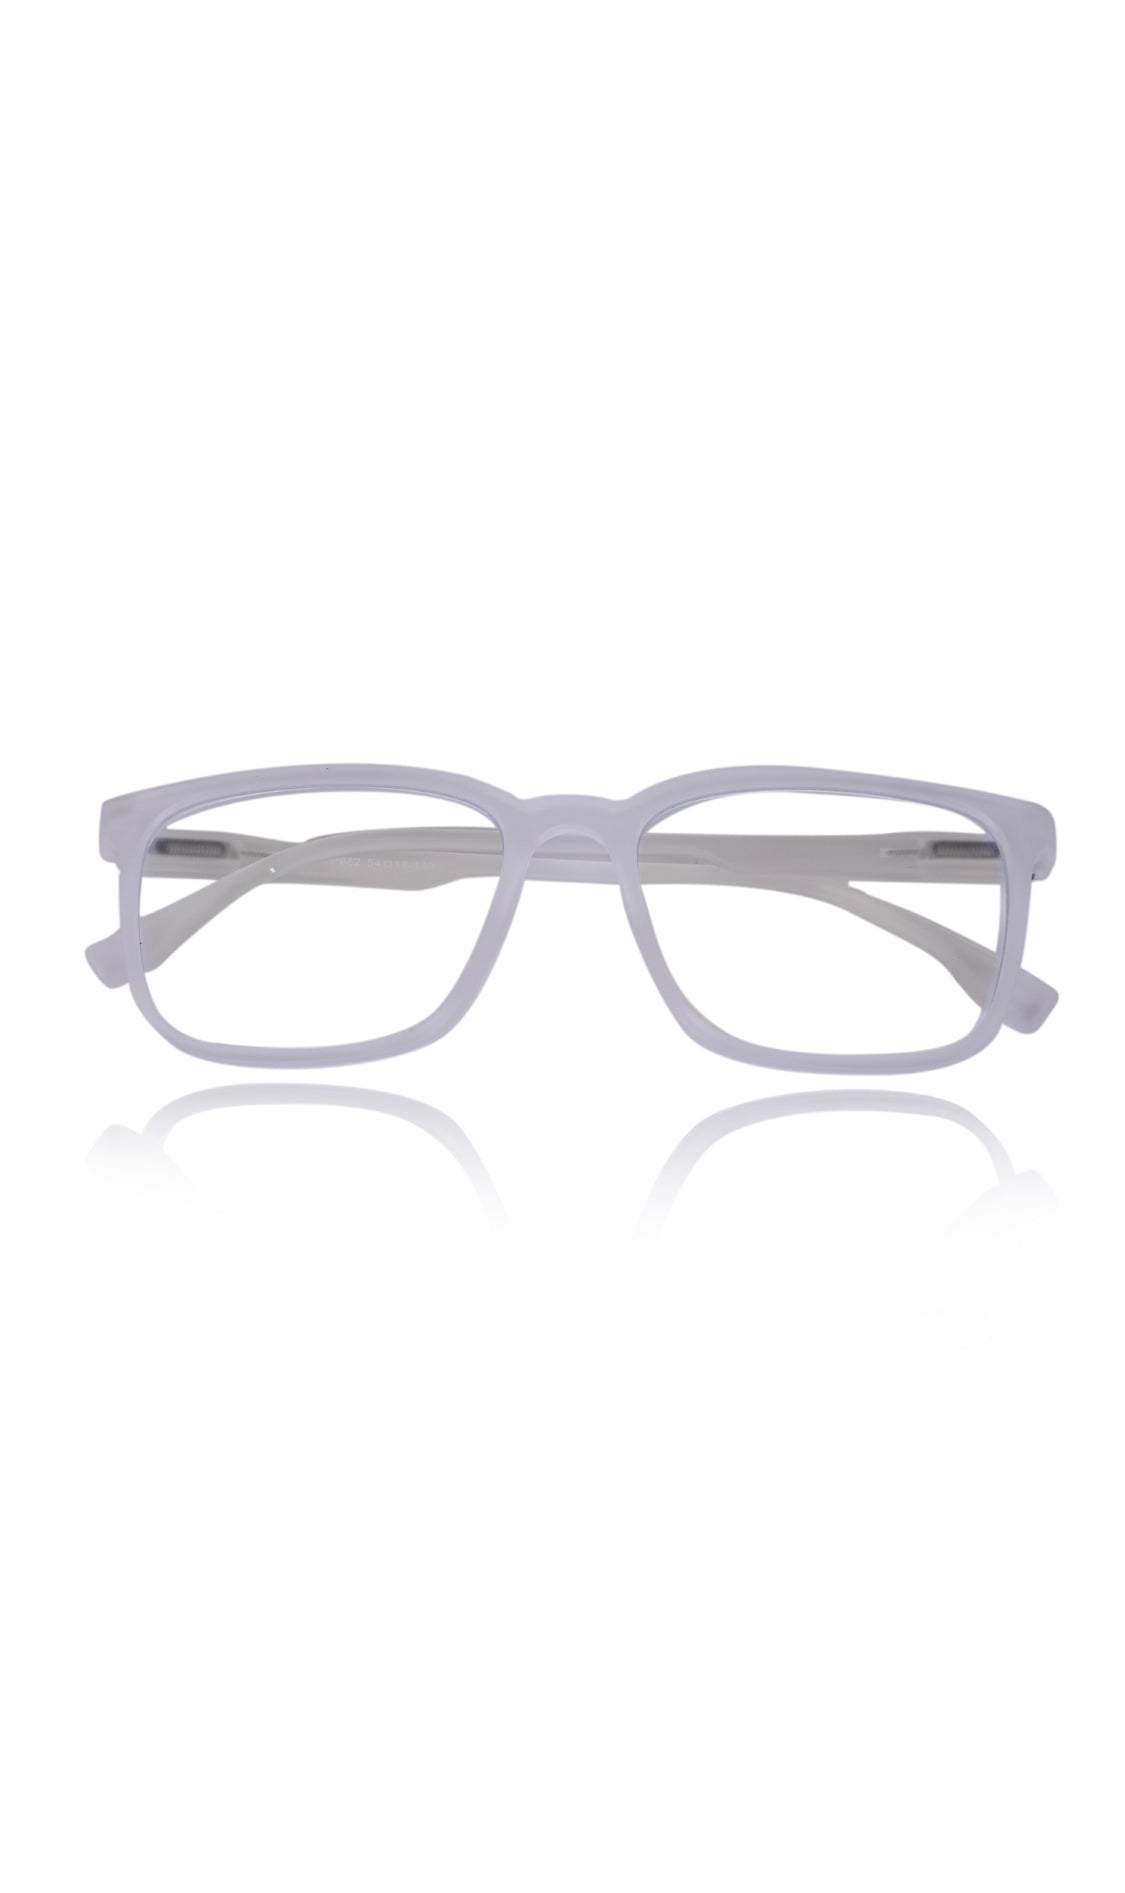 Jodykoes® Colour Series : Vibrant colours eyewear rectangle frames with anti glare and blue filter eyeglasses for men and women (Pearl White) - Jodykoes ®